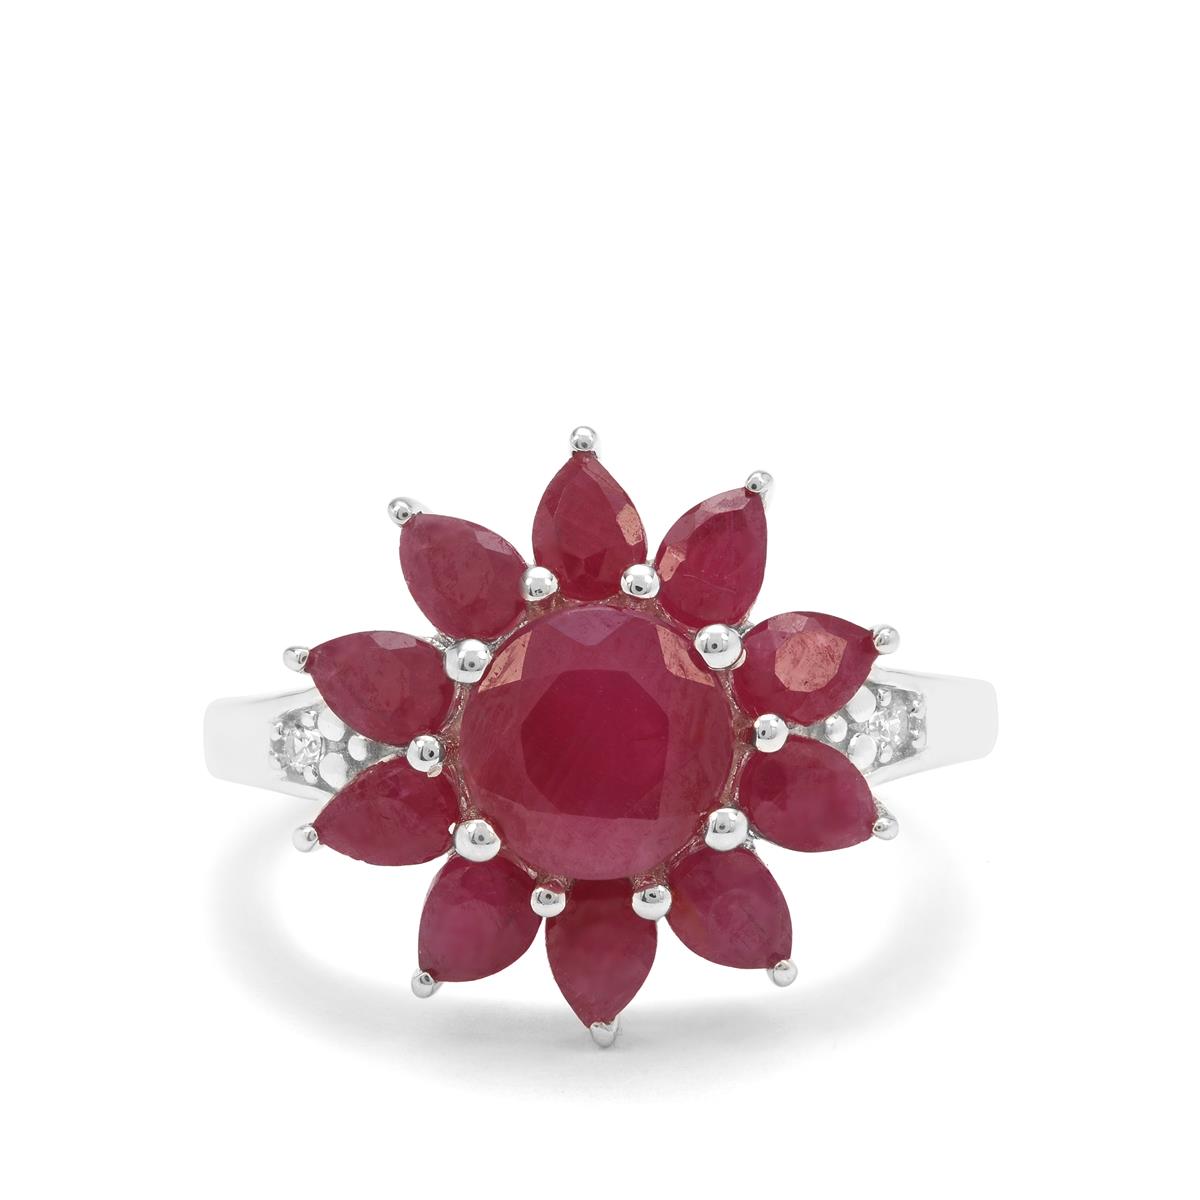 Bharat Ruby & White Zircon Sterling Silver Ring ATGW 4.45cts | Gemporia